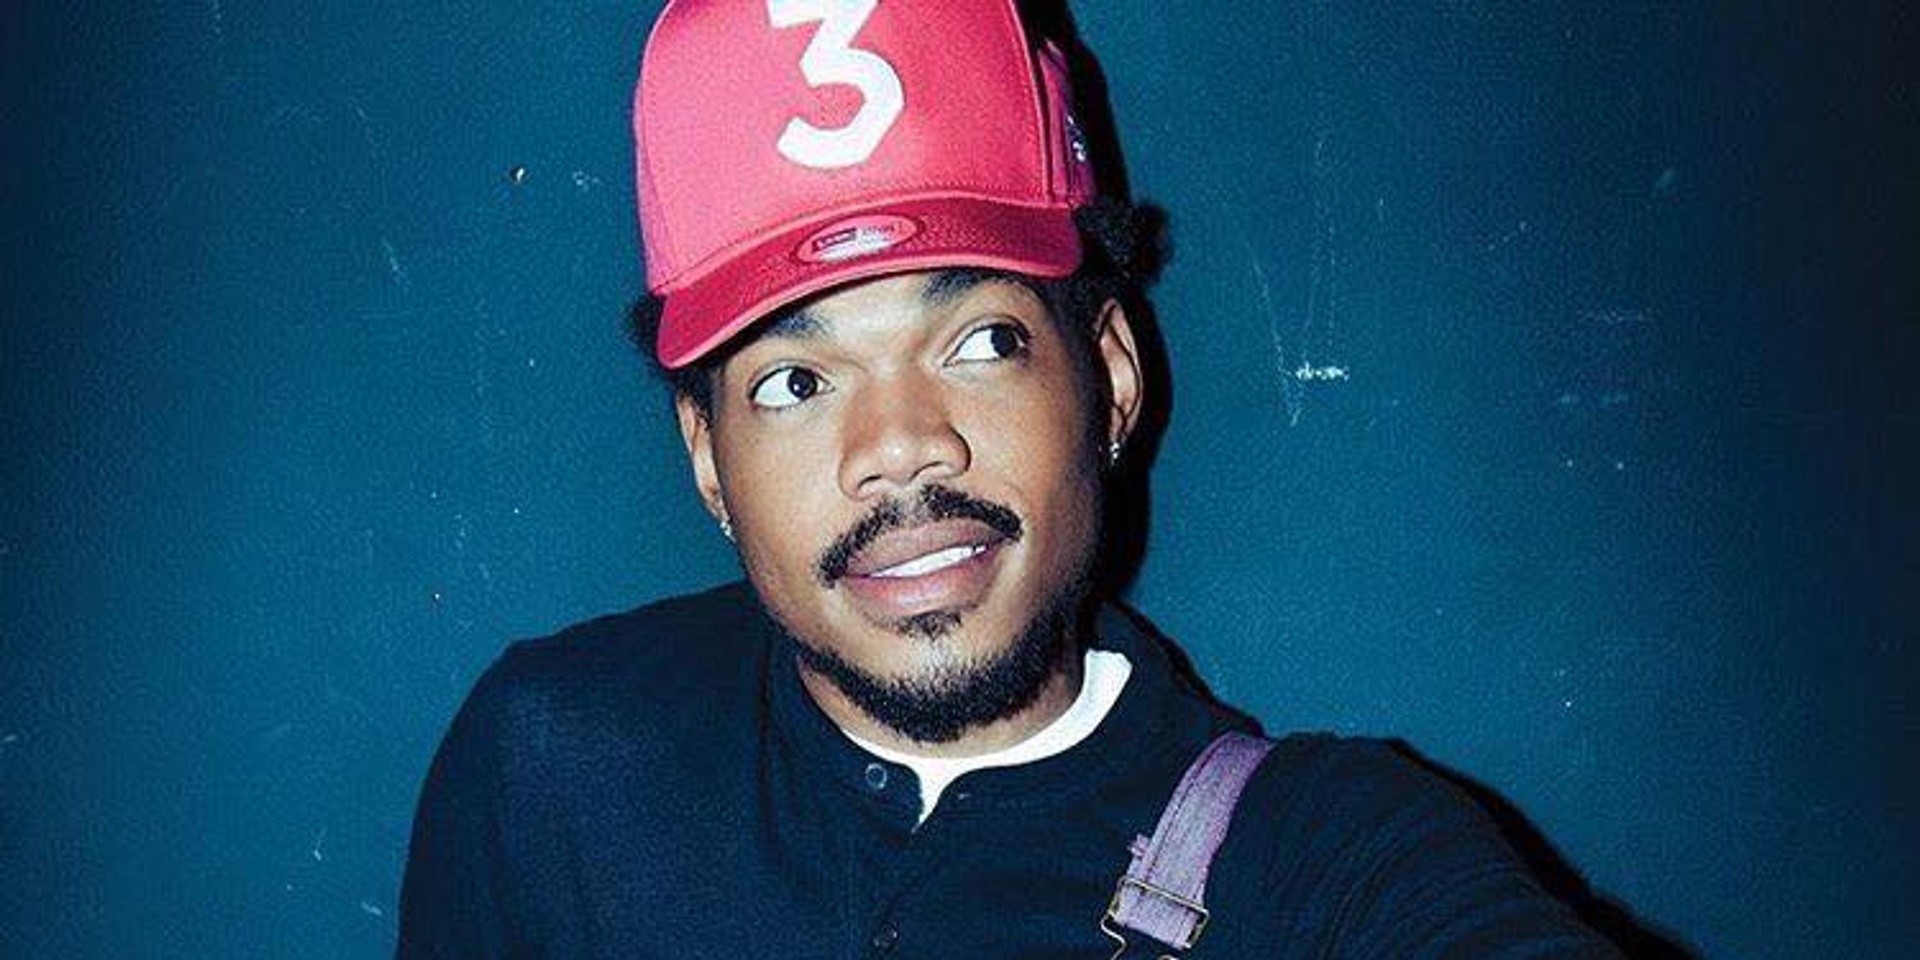 Ticketing details announced for Chance the Rapper's show in Singapore